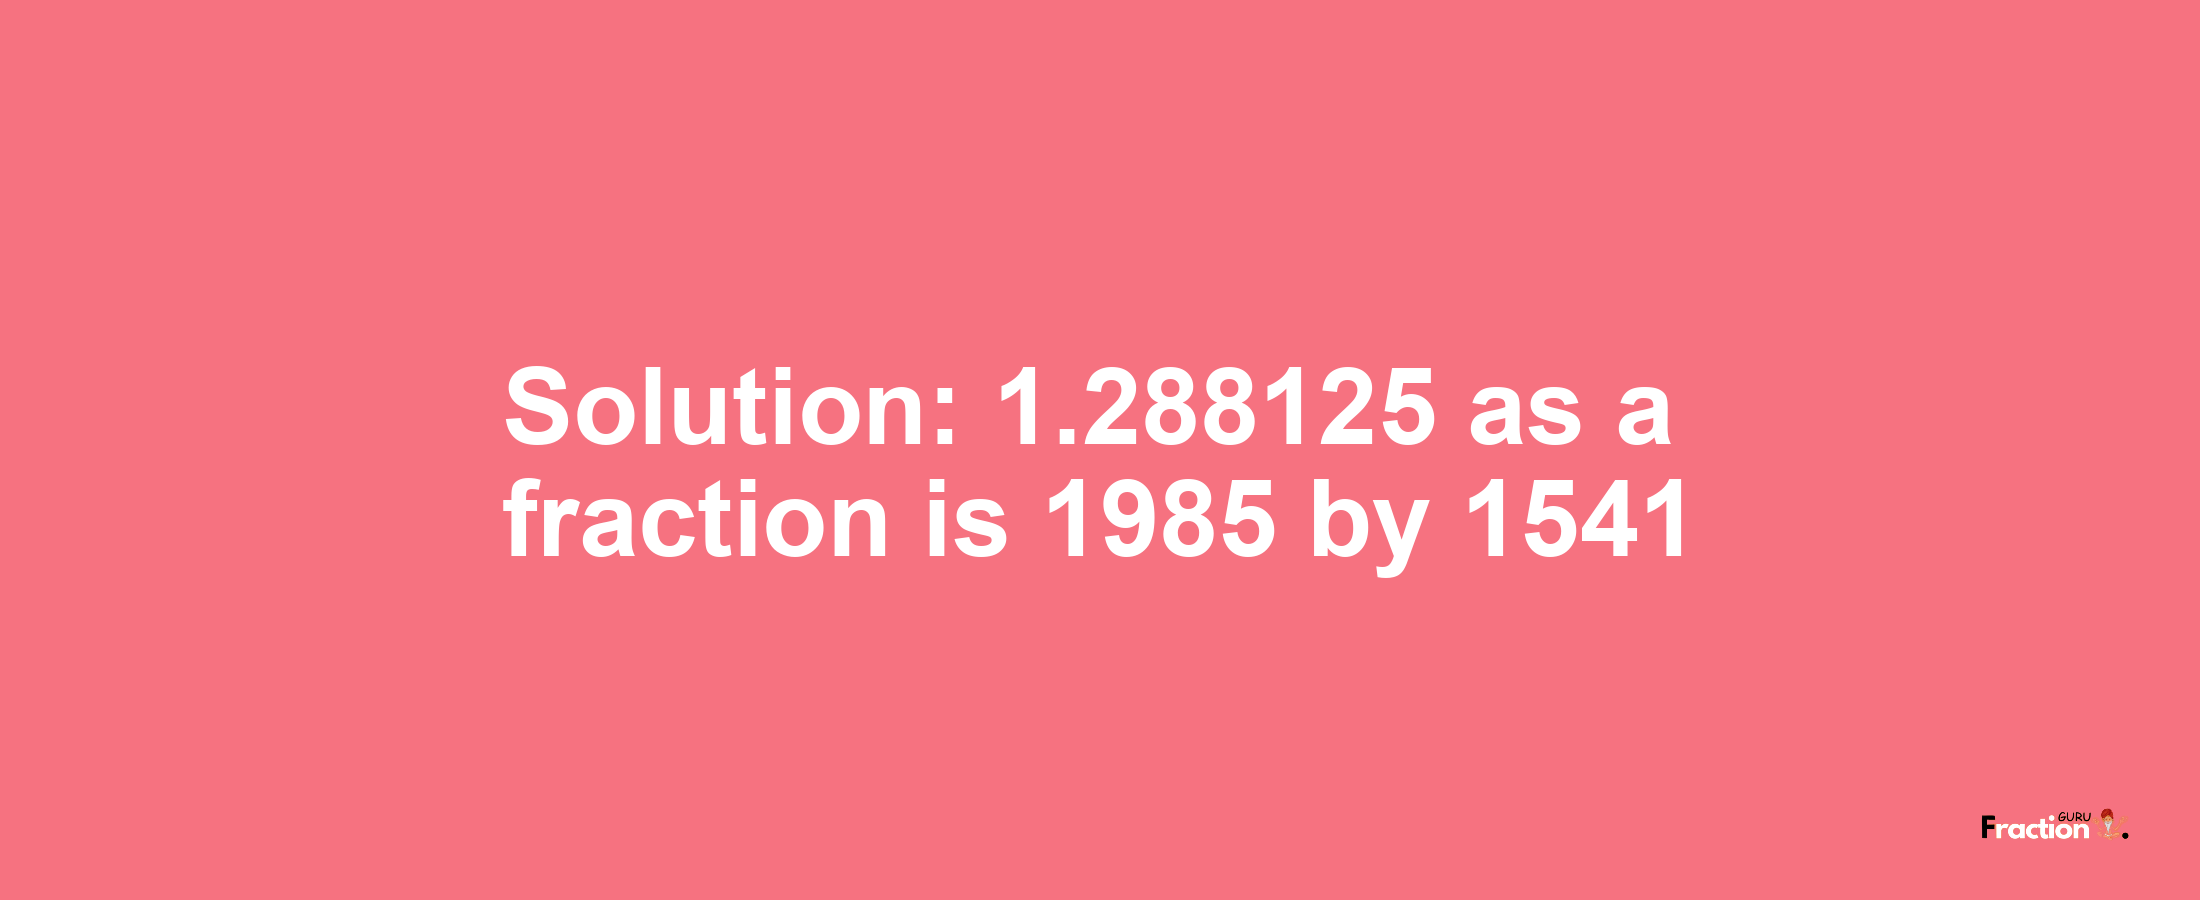 Solution:1.288125 as a fraction is 1985/1541